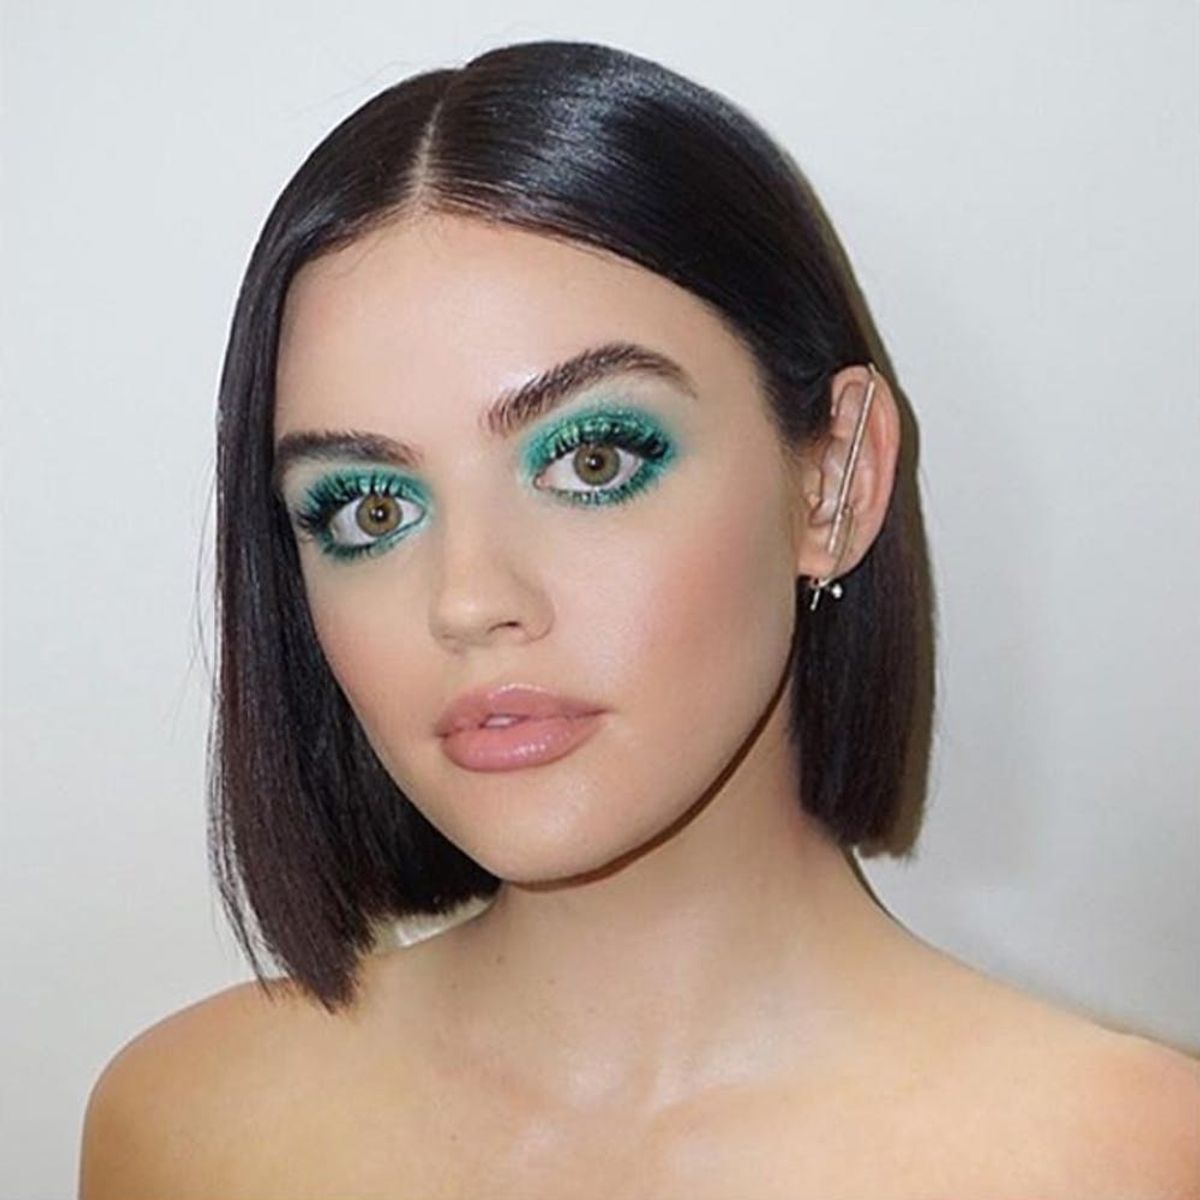 4 Jewel-Toned Eye Makeup Looks Fit for the Holidays